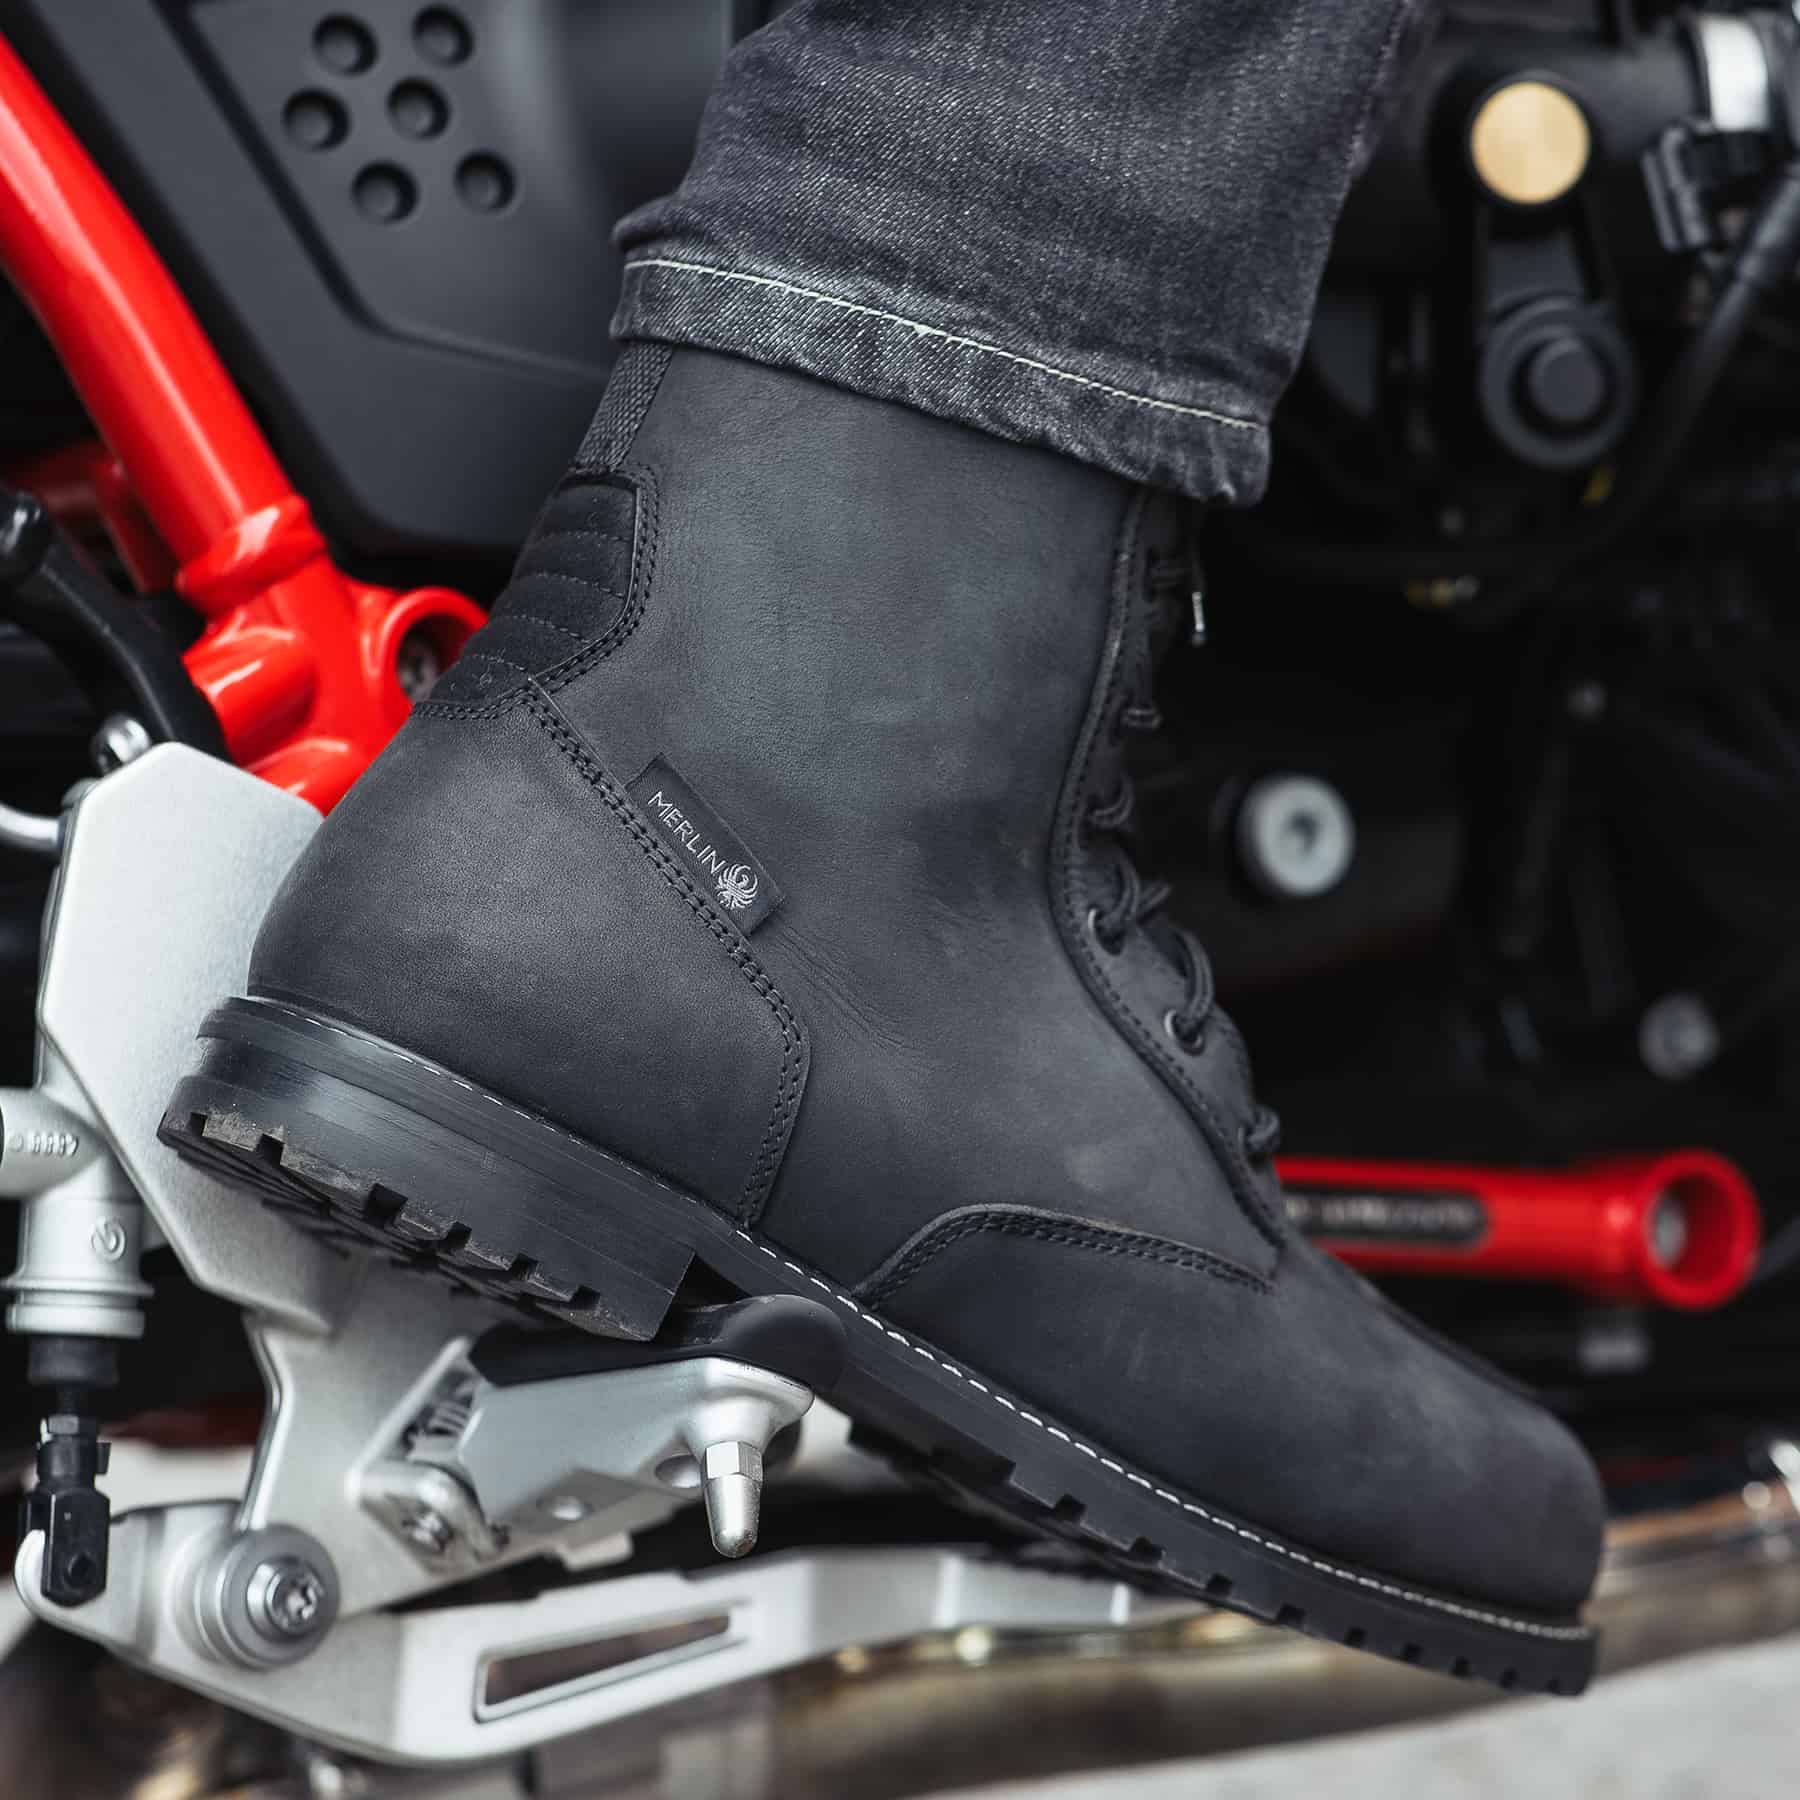 Lifestyle image of the Merlin Drax II boots in black